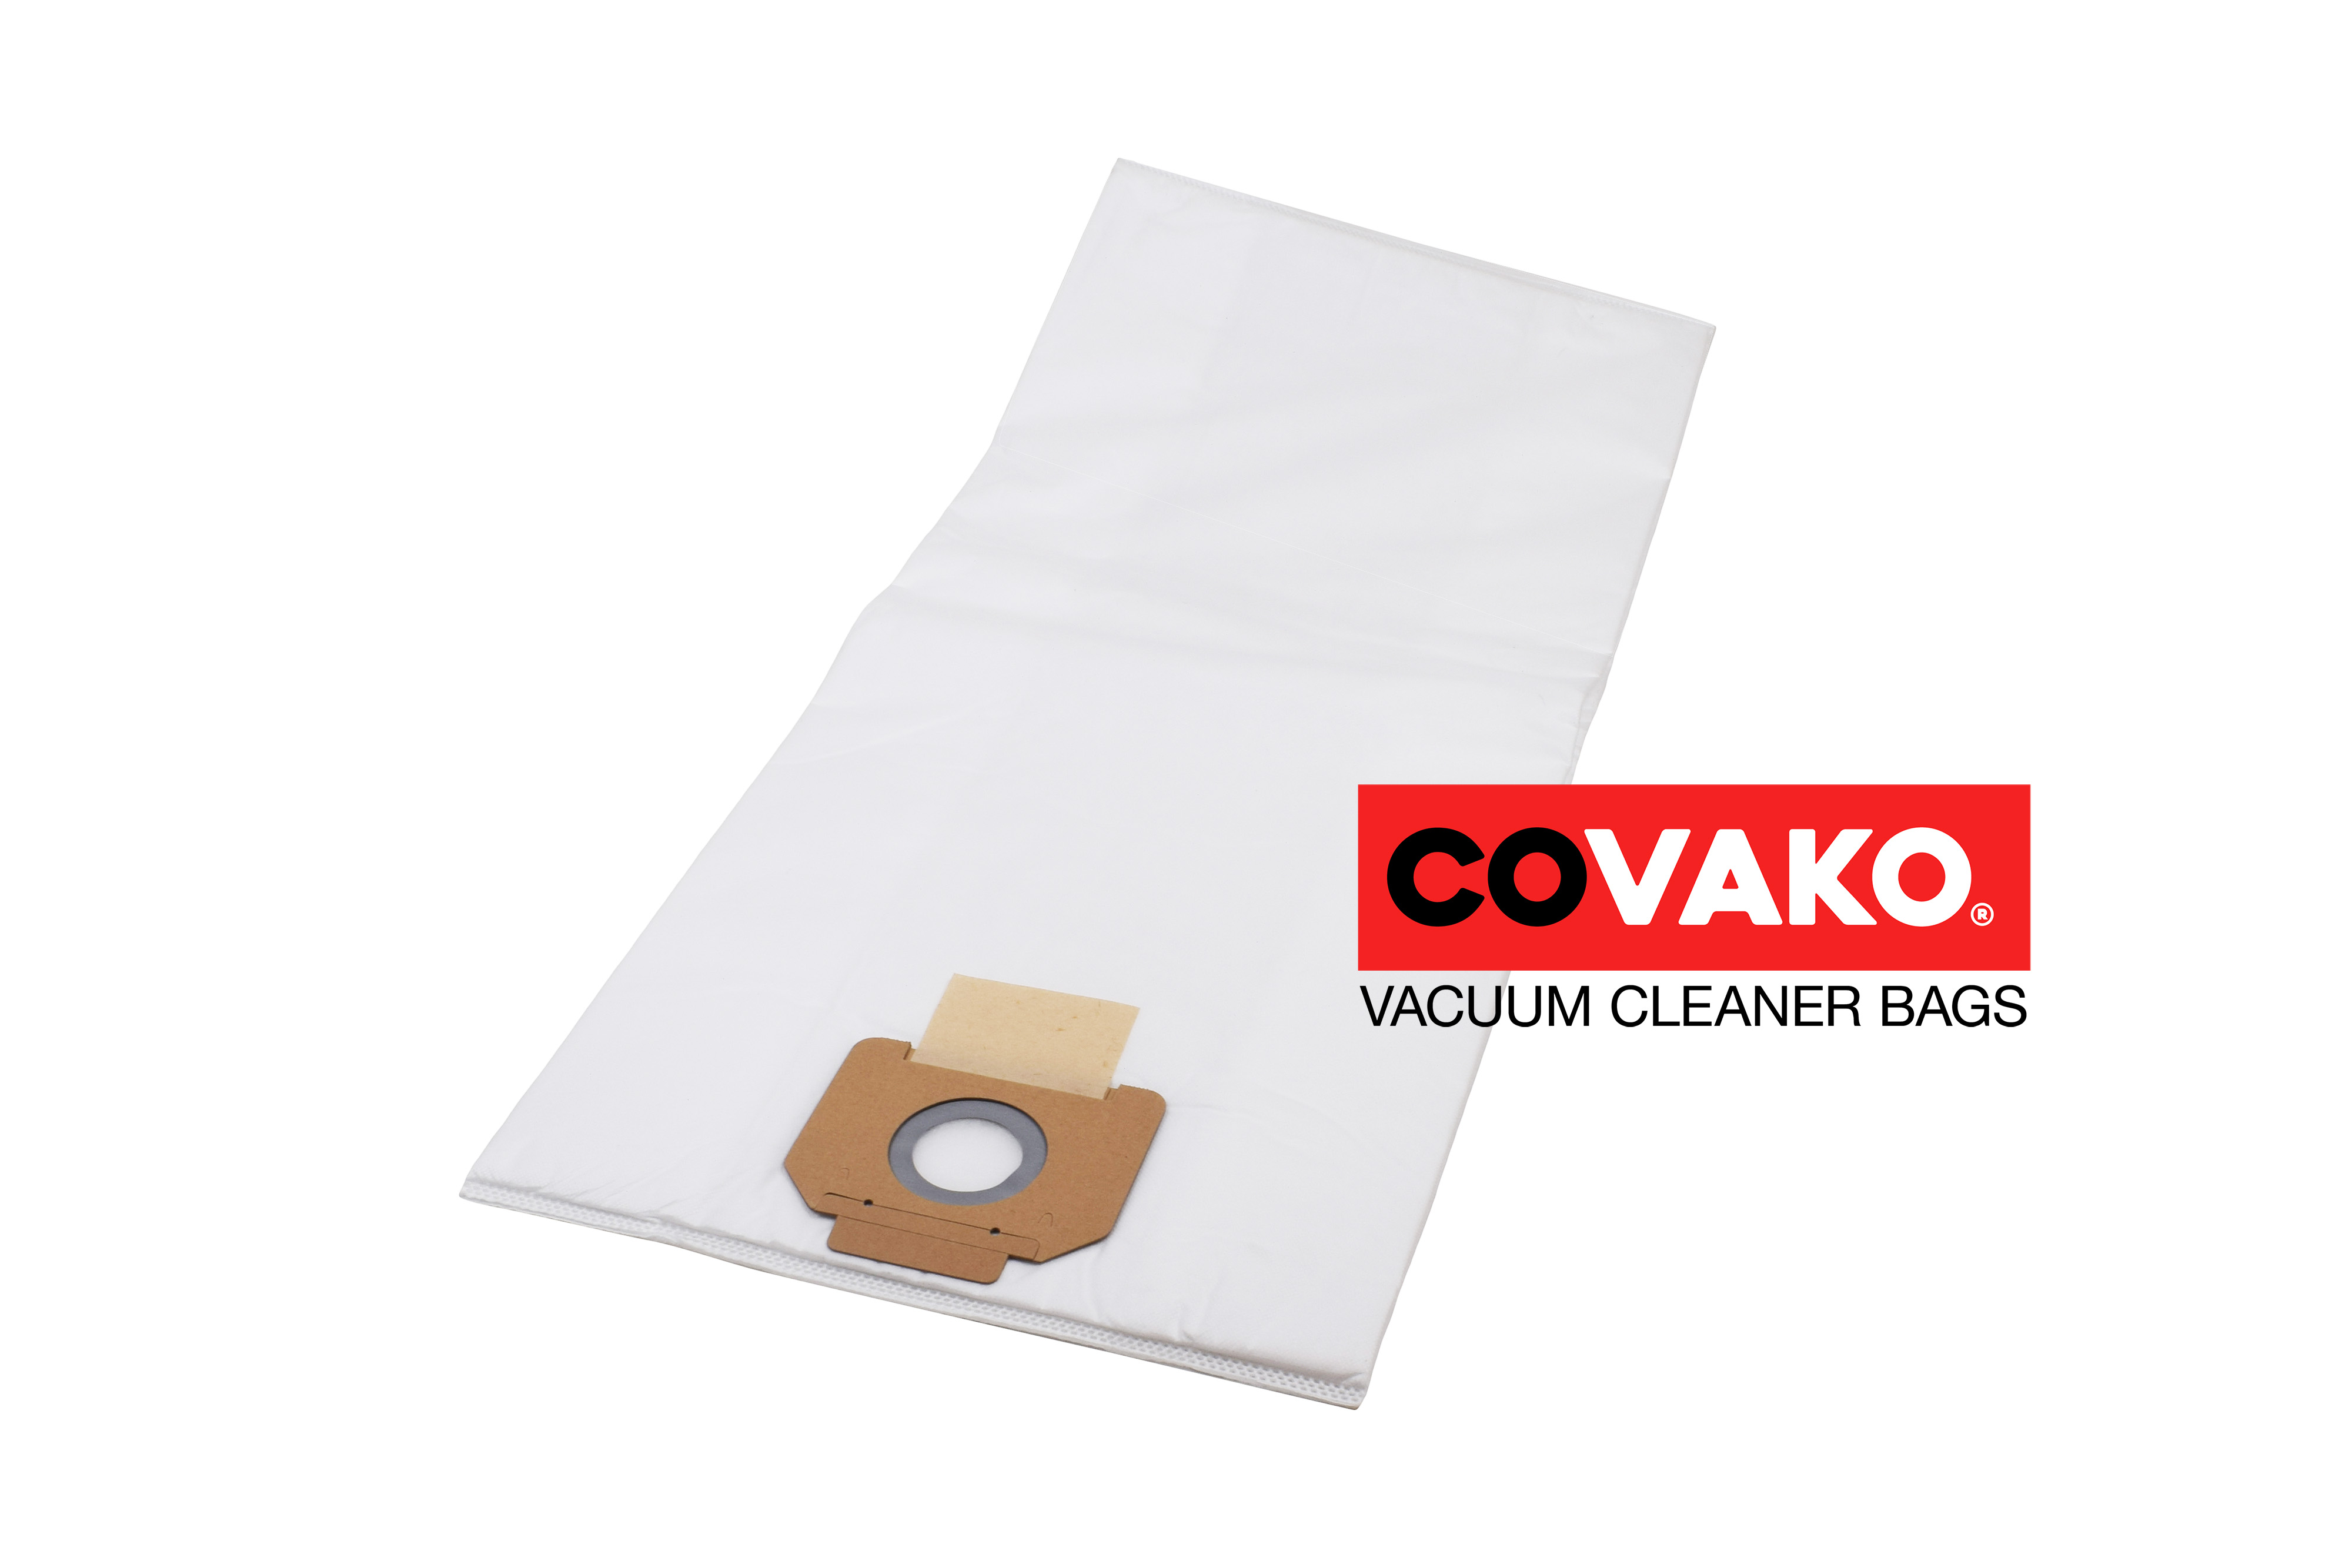 DiBo Windly 440 M IPC / Synthesis - DiBo vacuum cleaner bags